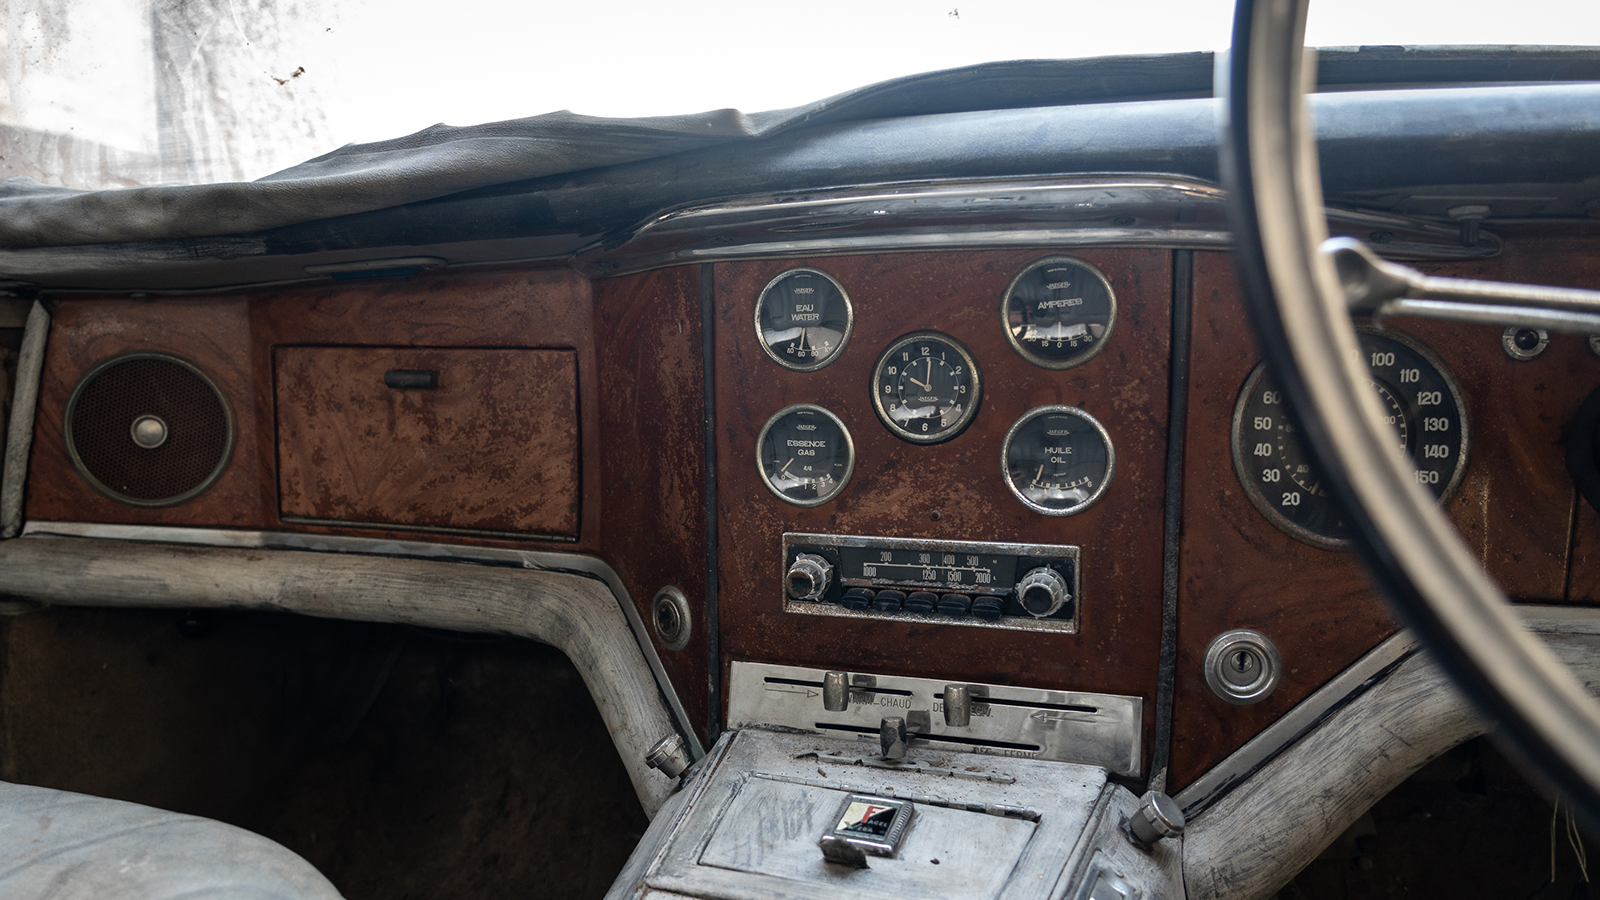 This barn-stored Facel Vega could be a tempting project